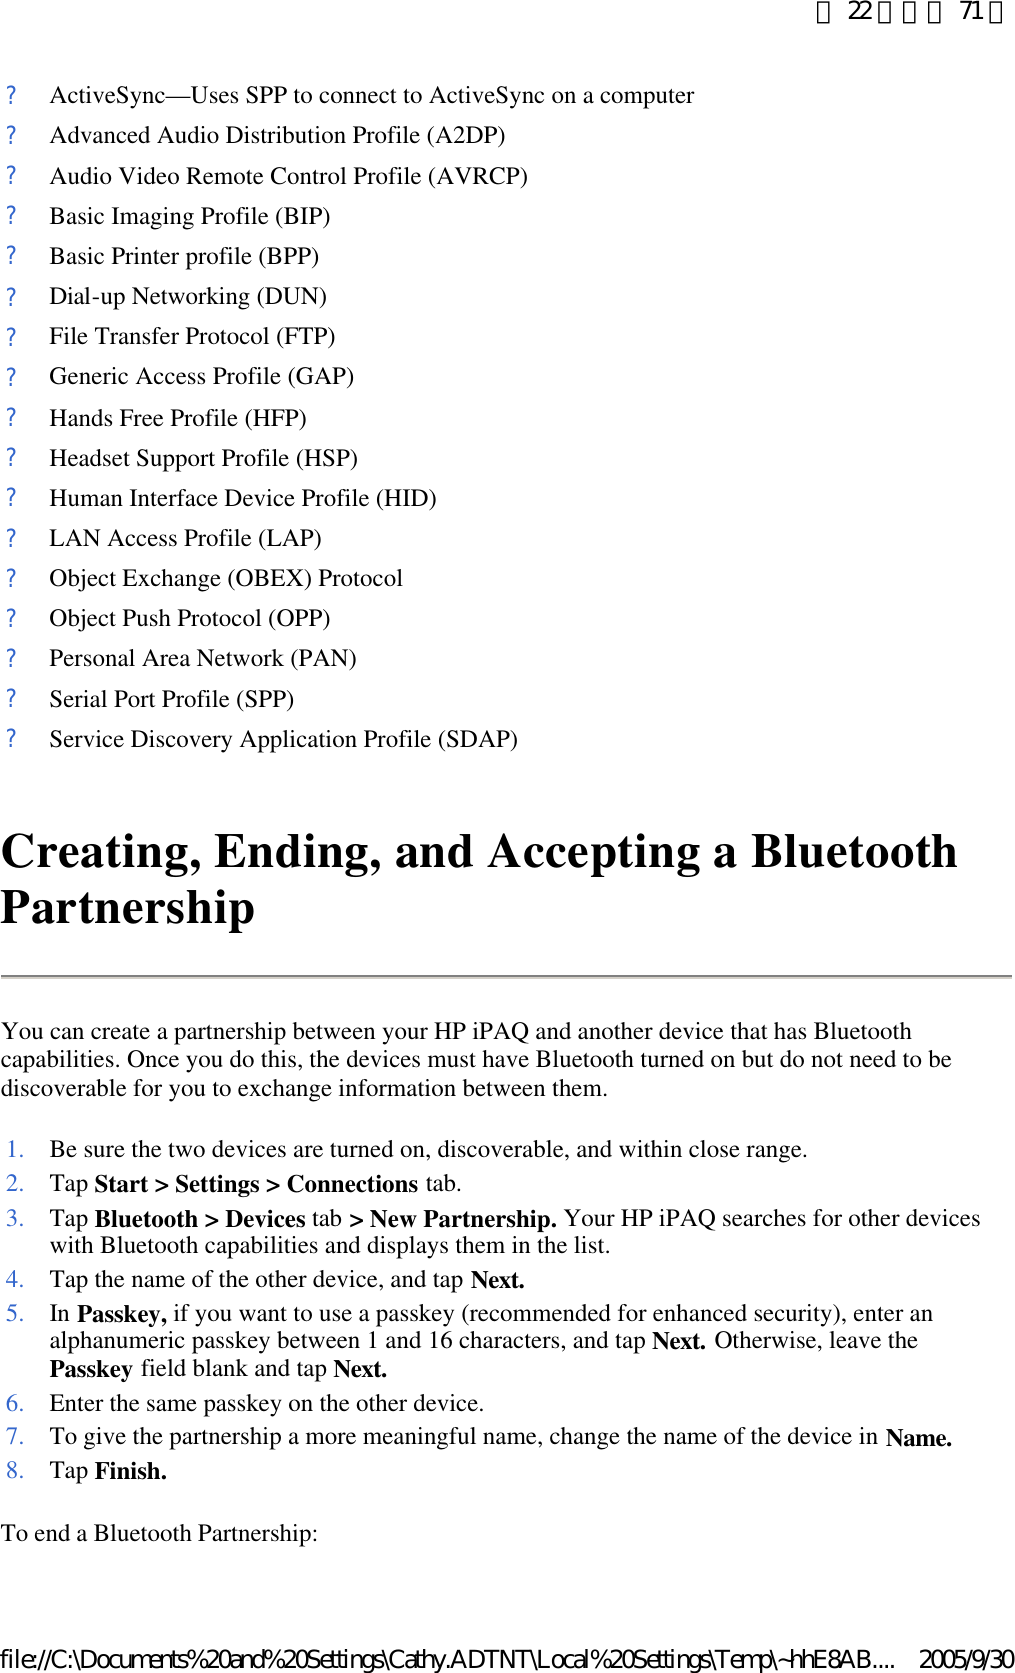 Creating, Ending, and Accepting a Bluetooth Partnership You can create a partnership between your HP iPAQ and another device that has Bluetooth capabilities. Once you do this, the devices must have Bluetooth turned on but do not need to be discoverable for you to exchange information between them.  To end a Bluetooth Partnership:  ?ActiveSync—Uses SPP to connect to ActiveSync on a computer?Advanced Audio Distribution Profile (A2DP)?Audio Video Remote Control Profile (AVRCP)?Basic Imaging Profile (BIP)?Basic Printer profile (BPP)?Dial-up Networking (DUN)?File Transfer Protocol (FTP)?Generic Access Profile (GAP)?Hands Free Profile (HFP)?Headset Support Profile (HSP)?Human Interface Device Profile (HID)?LAN Access Profile (LAP)?Object Exchange (OBEX) Protocol?Object Push Protocol (OPP)?Personal Area Network (PAN)?Serial Port Profile (SPP)?Service Discovery Application Profile (SDAP)1. Be sure the two devices are turned on, discoverable, and within close range.2. Tap Start &gt; Settings &gt; Connections tab. 3. Tap Bluetooth &gt; Devices tab &gt; New Partnership. Your HP iPAQ searches for other devices with Bluetooth capabilities and displays them in the list. 4. Tap the name of the other device, and tap Next.5. In Passkey, if you want to use a passkey (recommended for enhanced security), enter an alphanumeric passkey between 1 and 16 characters, and tap Next. Otherwise, leave the Passkey field blank and tap Next.6. Enter the same passkey on the other device.7. To give the partnership a more meaningful name, change the name of the device in Name.8. Tap Finish.第 22 頁，共 71 頁2005/9/30file://C:\Documents%20and%20Settings\Cathy.ADTNT\Local%20Settings\Temp\~hhE8AB....